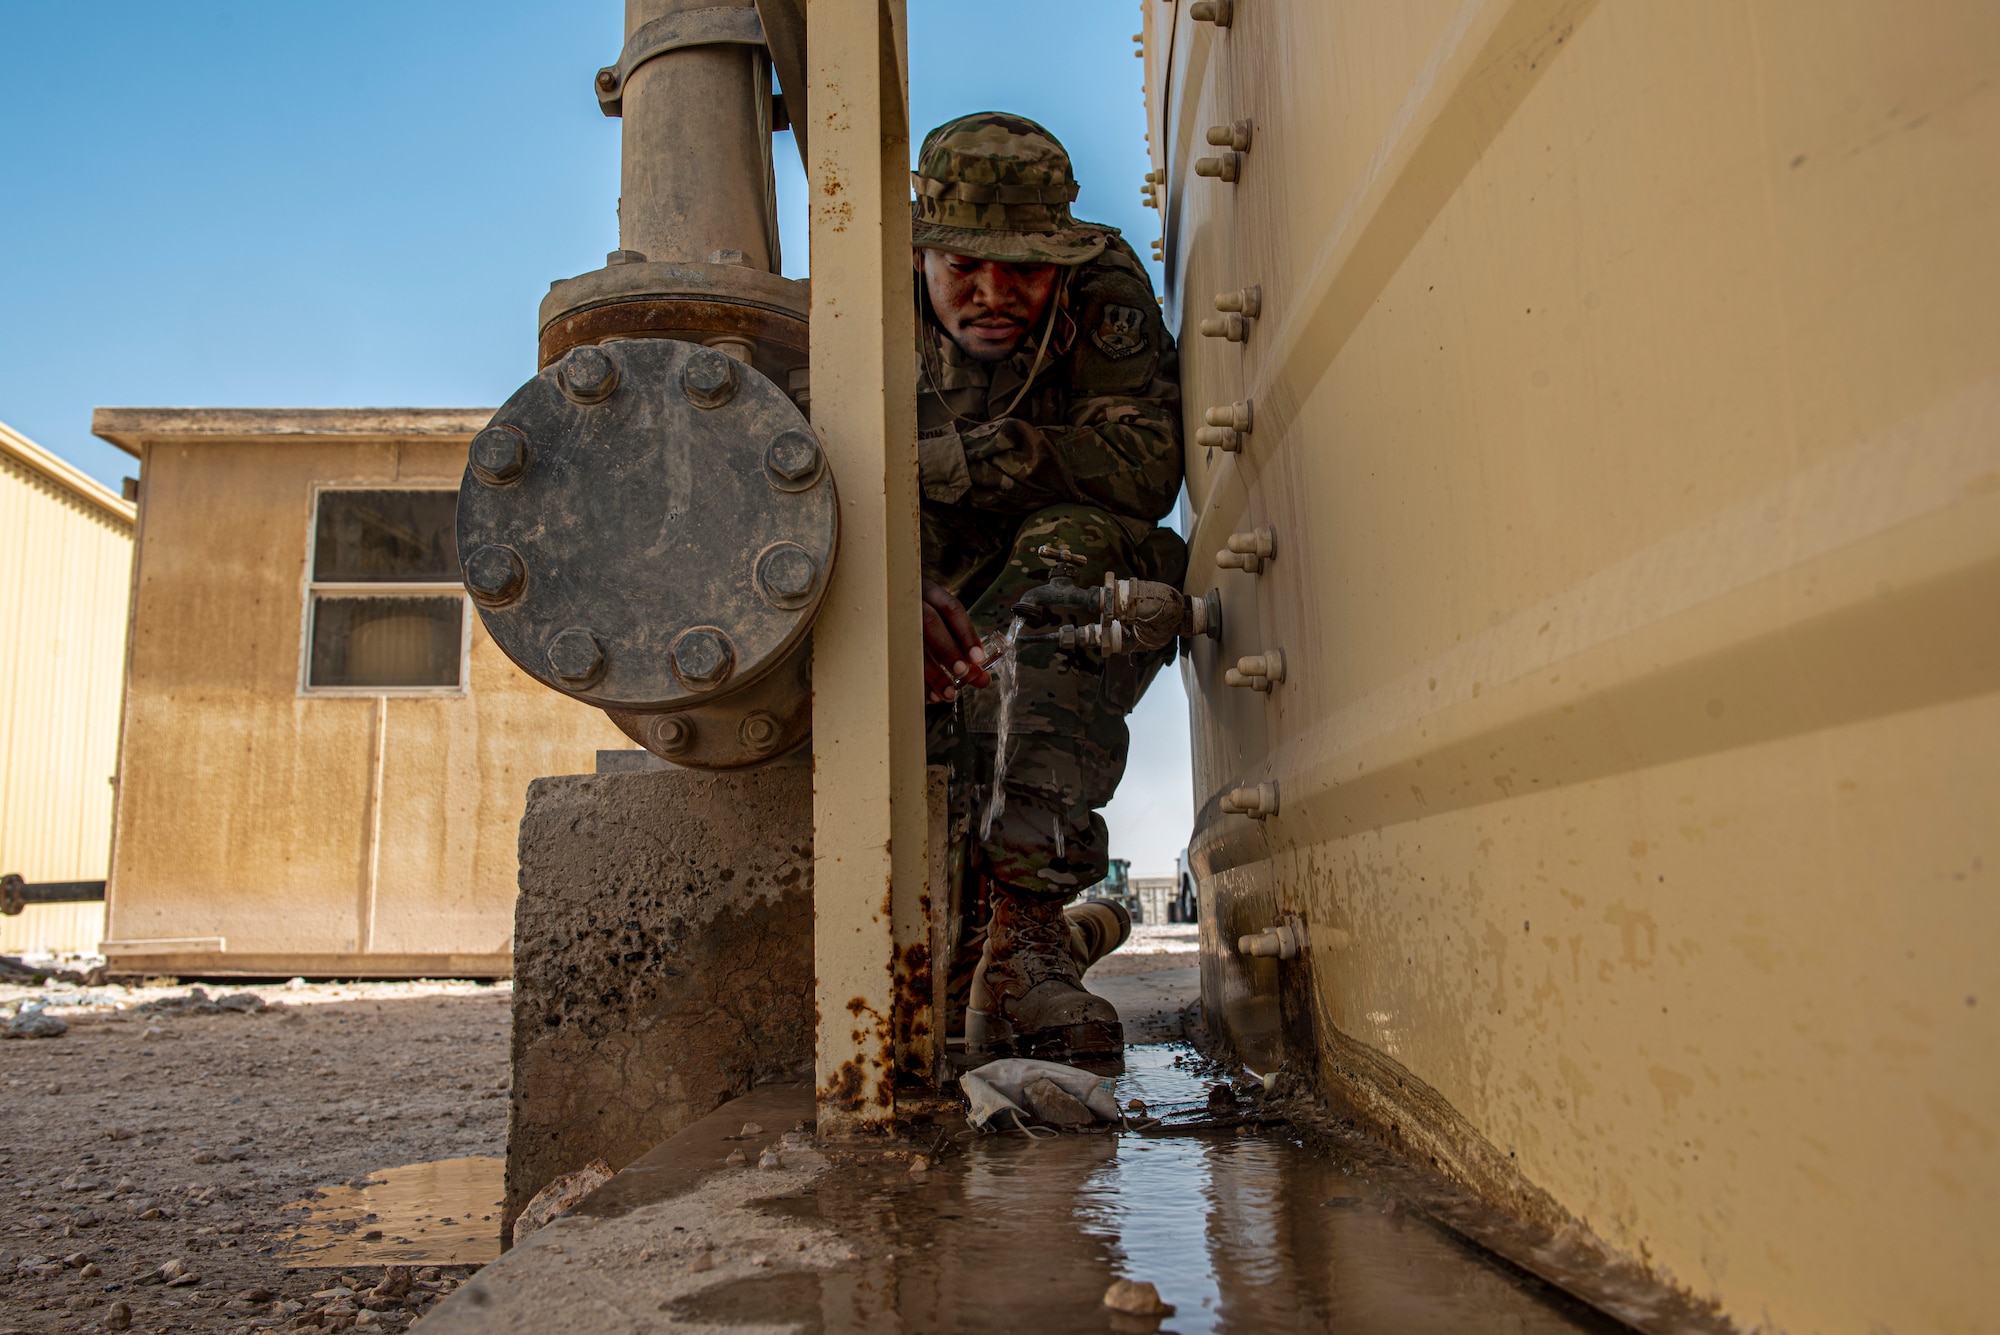 Airman 1st Class Brandon Johnson, 379th Expeditionary Civil Engineer Squadron water & fuel systems maintenance journeyman, collects a daily water sample to ensure quality standards are being met June 16, 2021 at Al Udeid Air Base, Qatar.